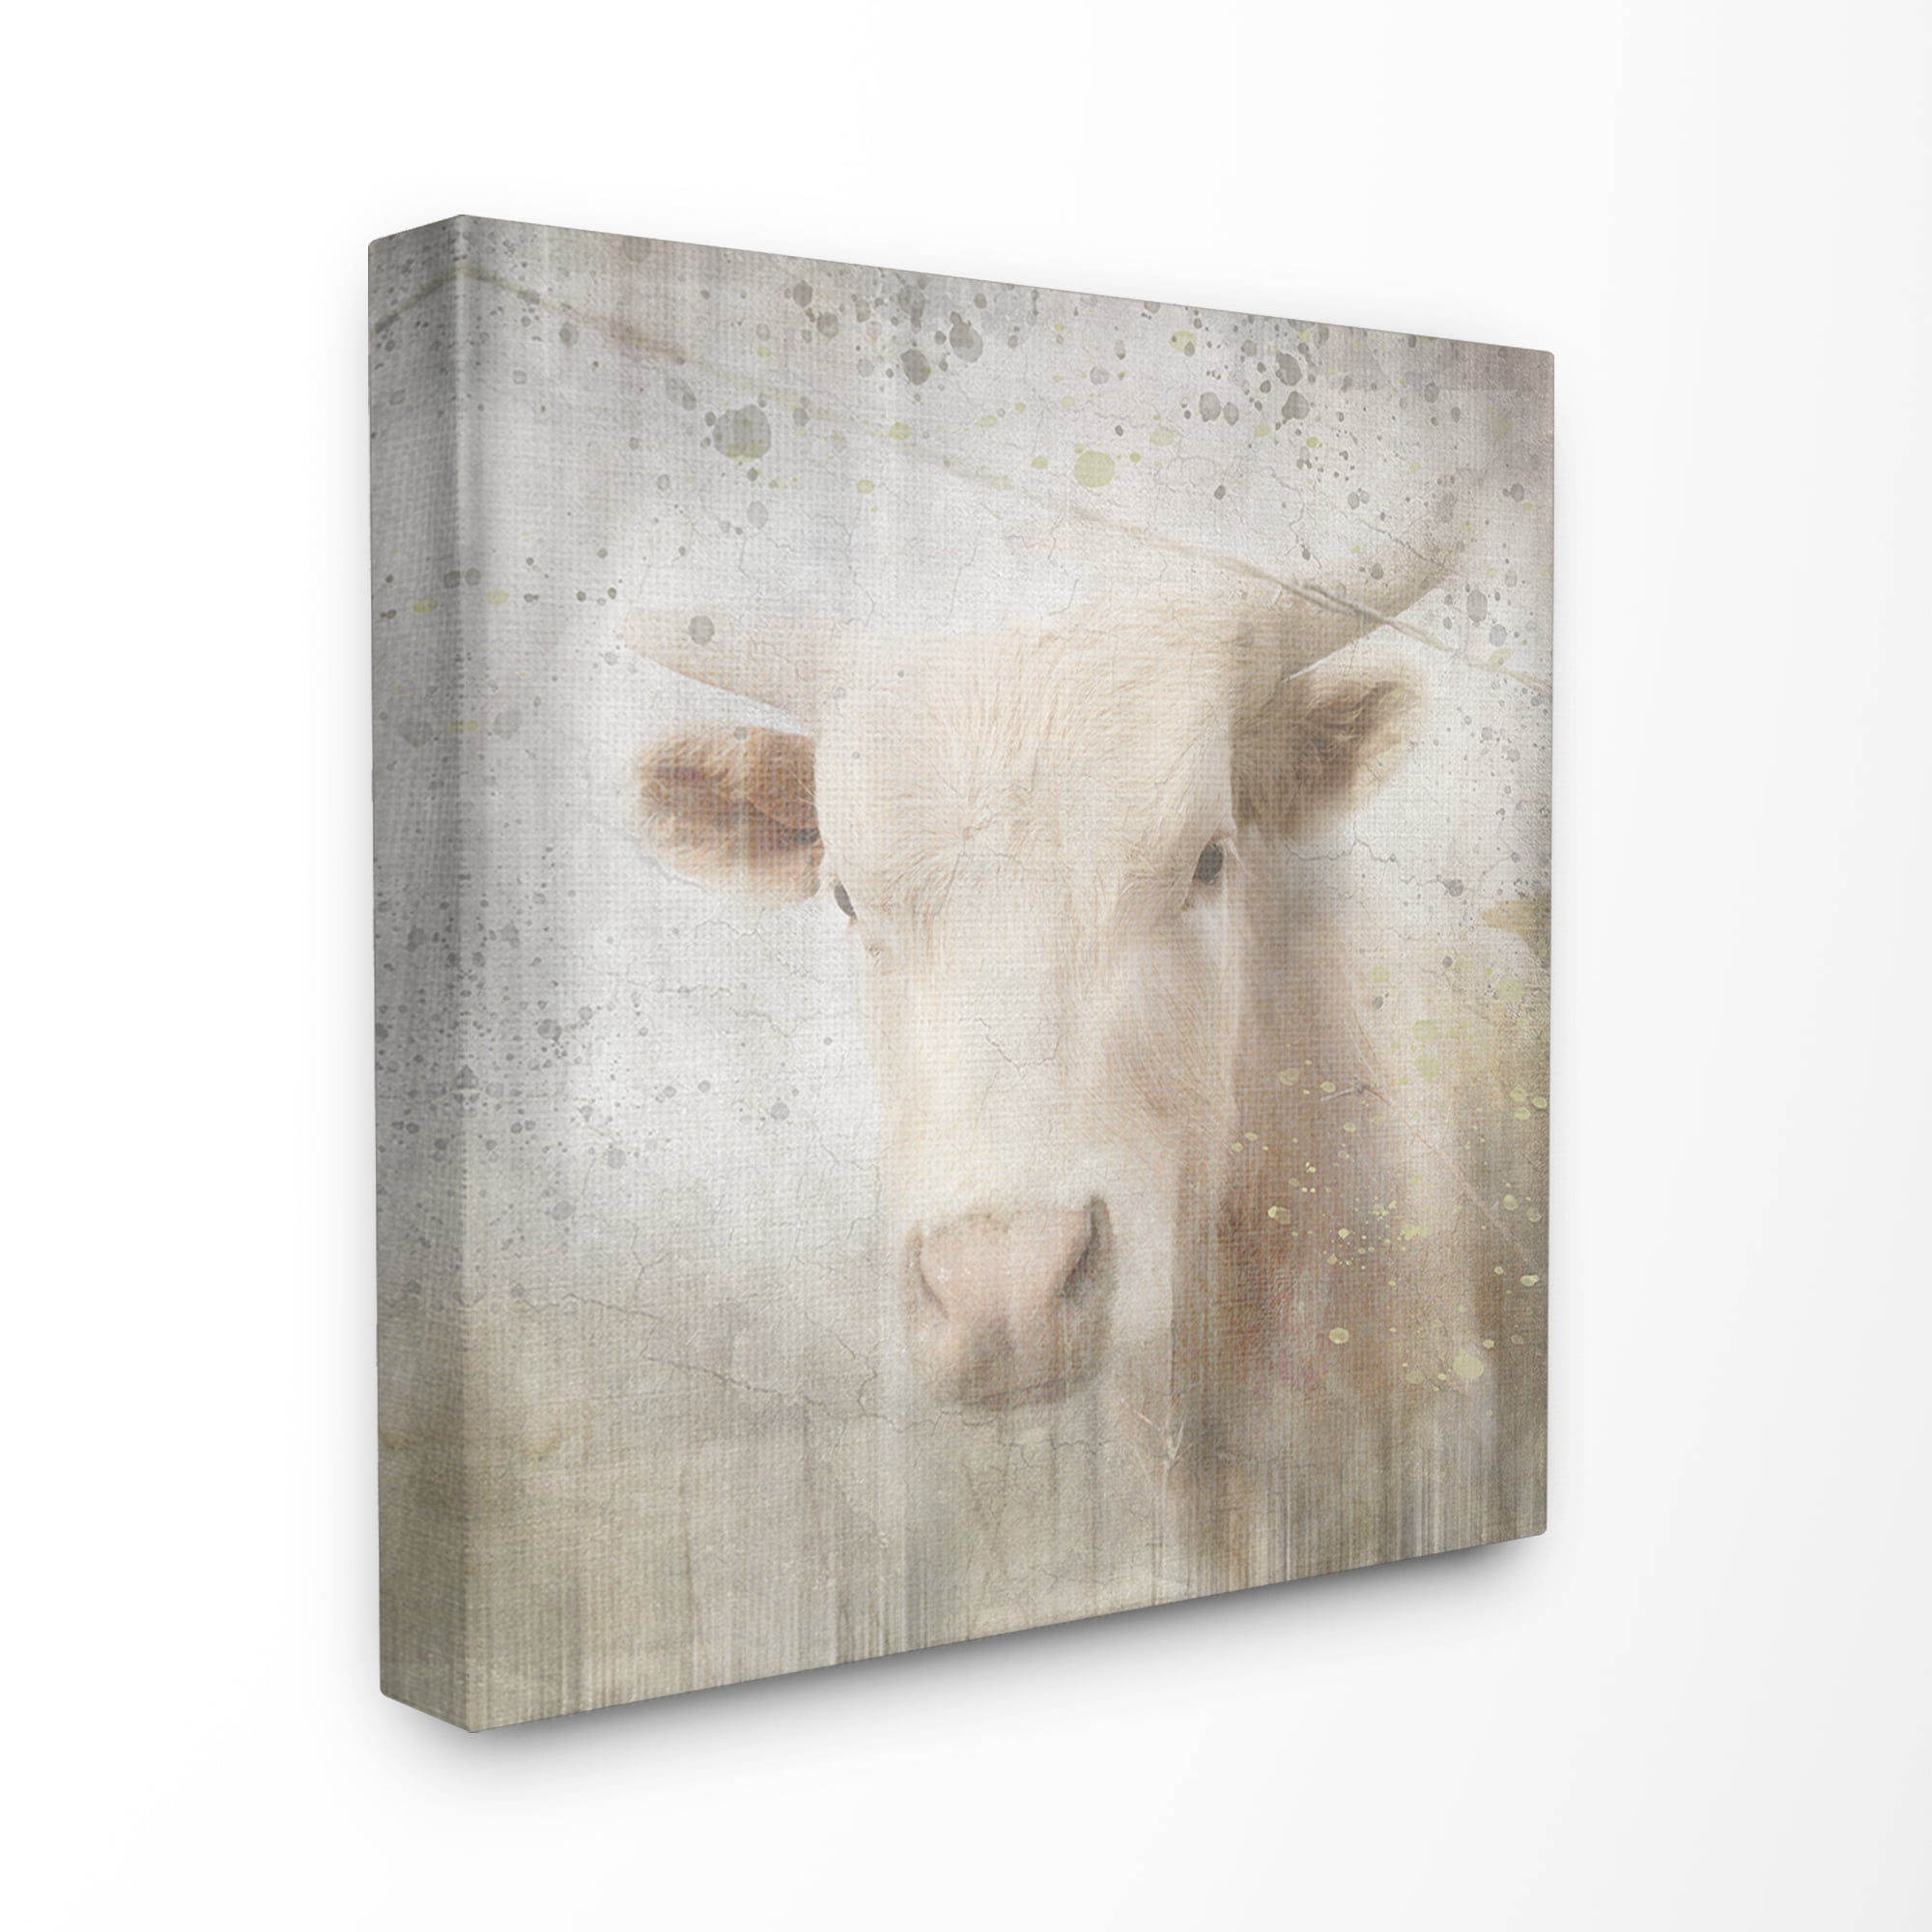 12 x 12 Stupell Industries Washed Out Distressed Surface Rustic Cow Portrait Black Framed Wall Art Multi-Color